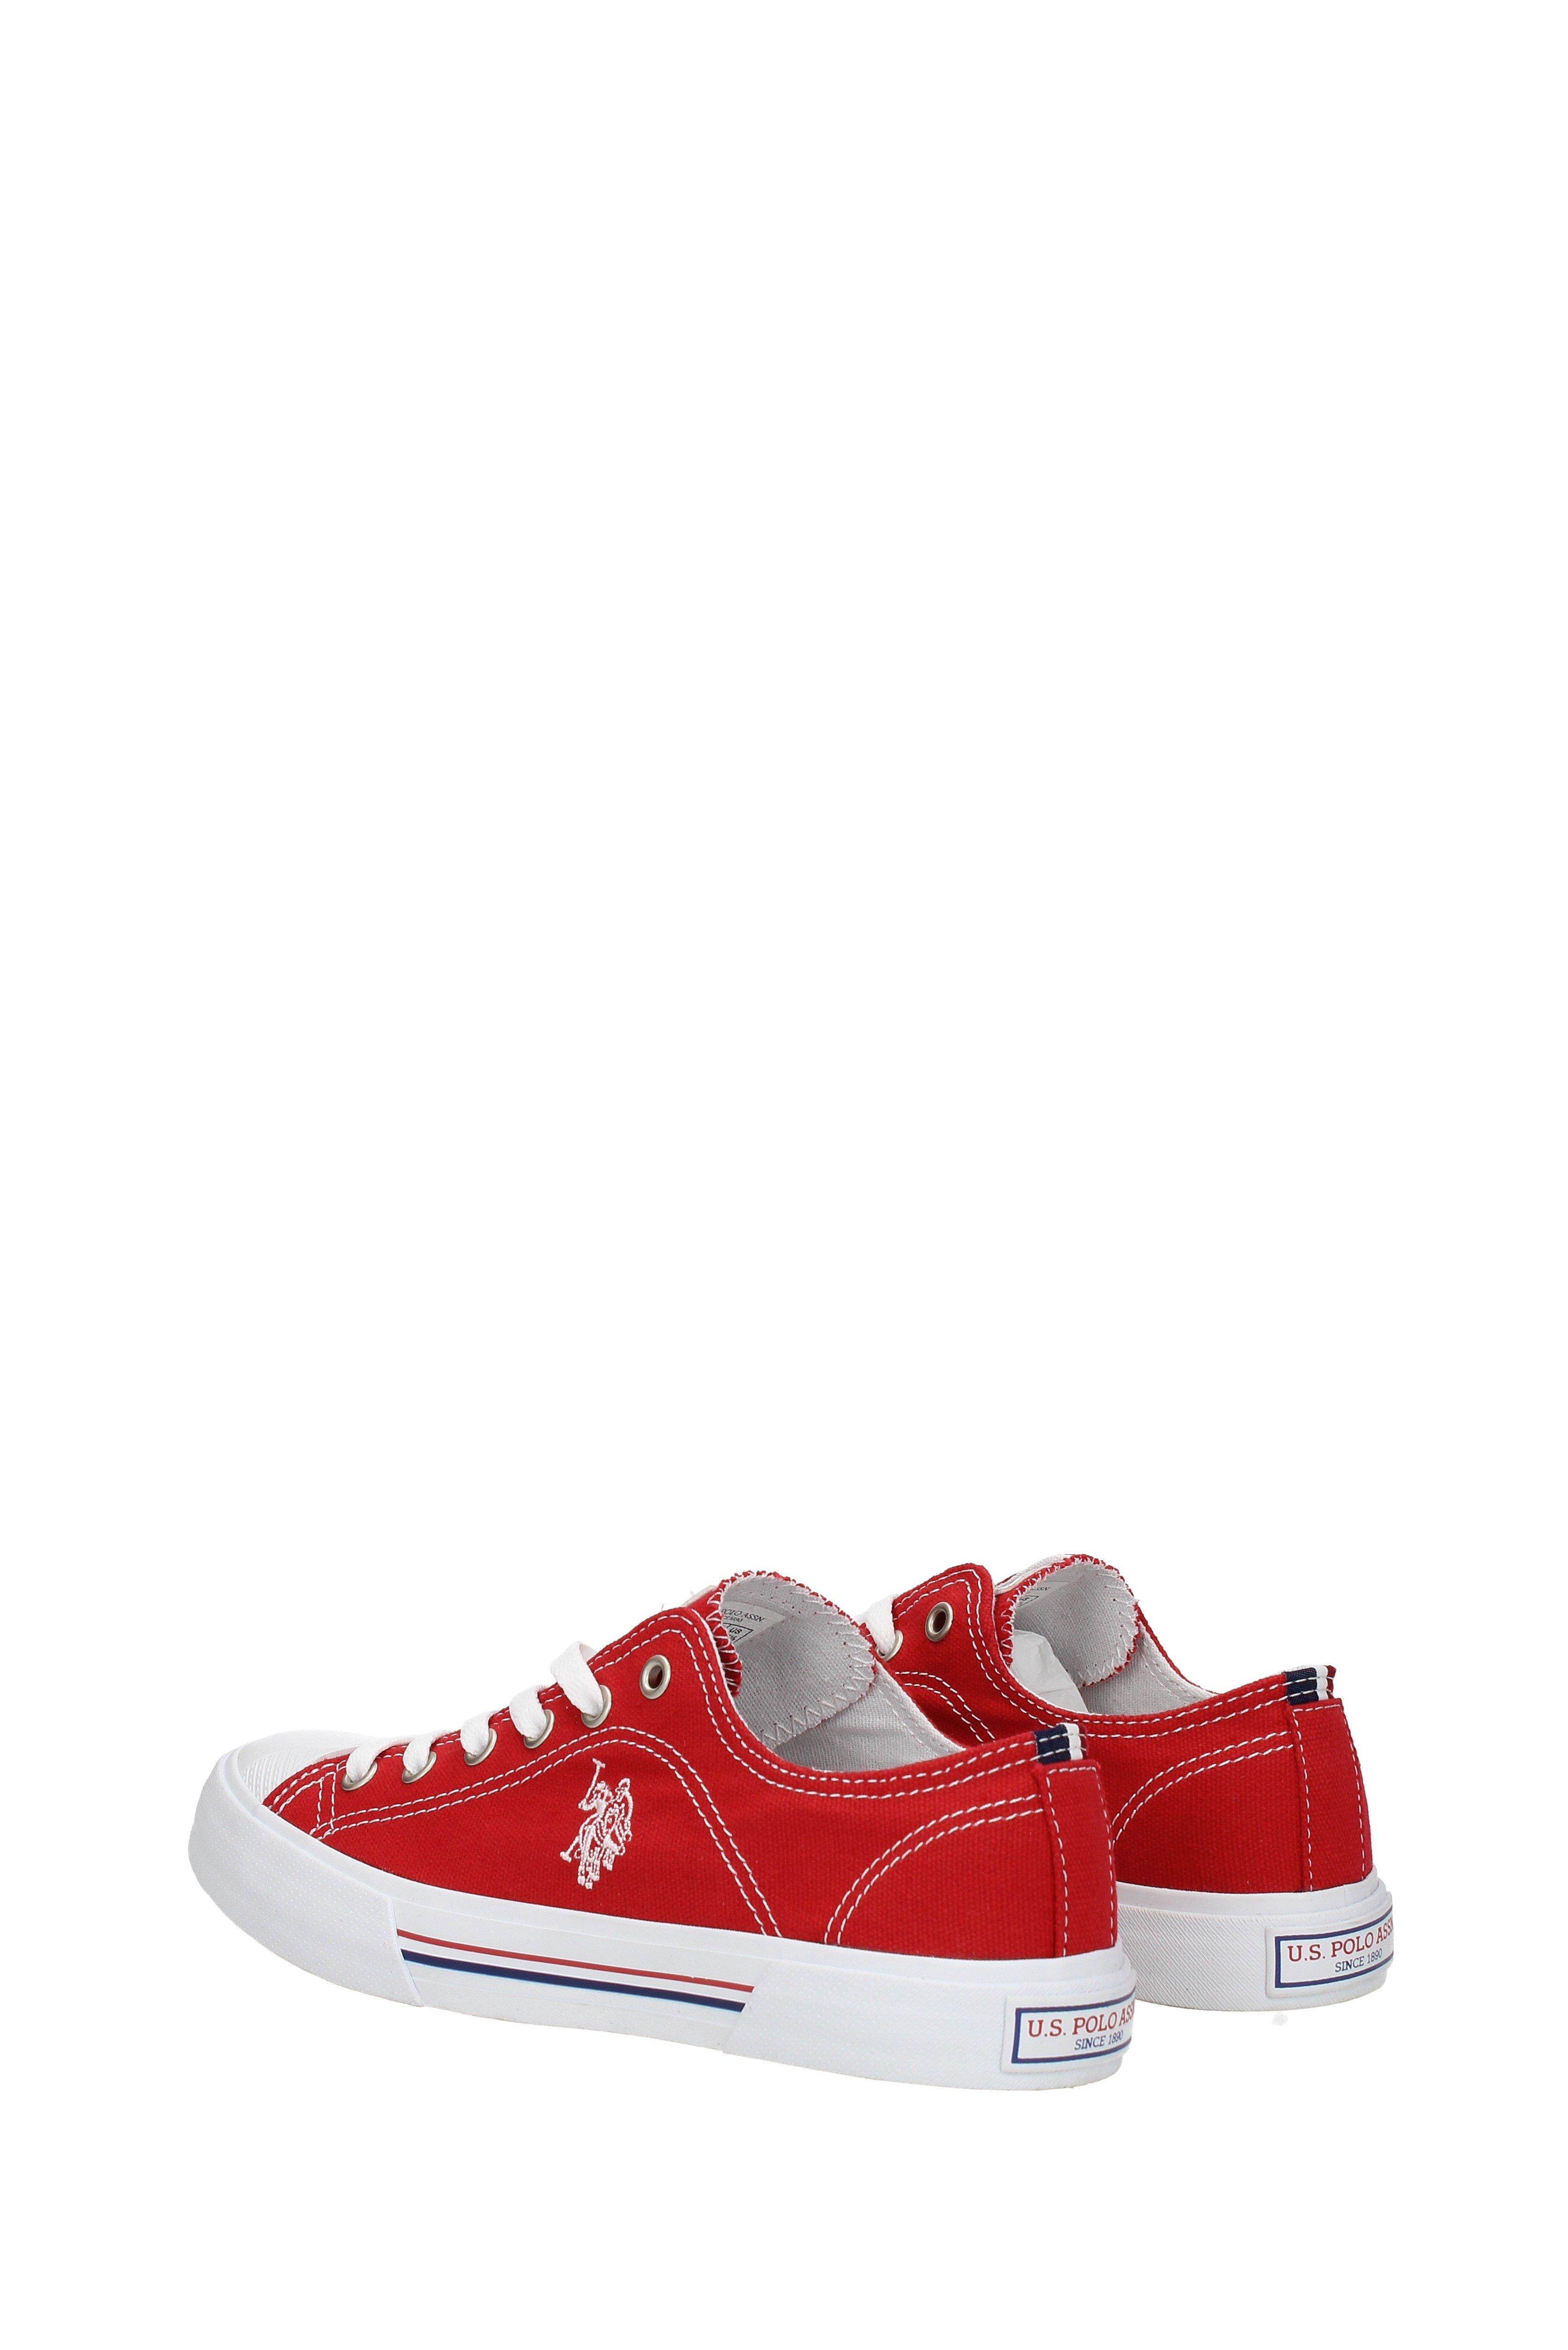 us polo assn red shoes